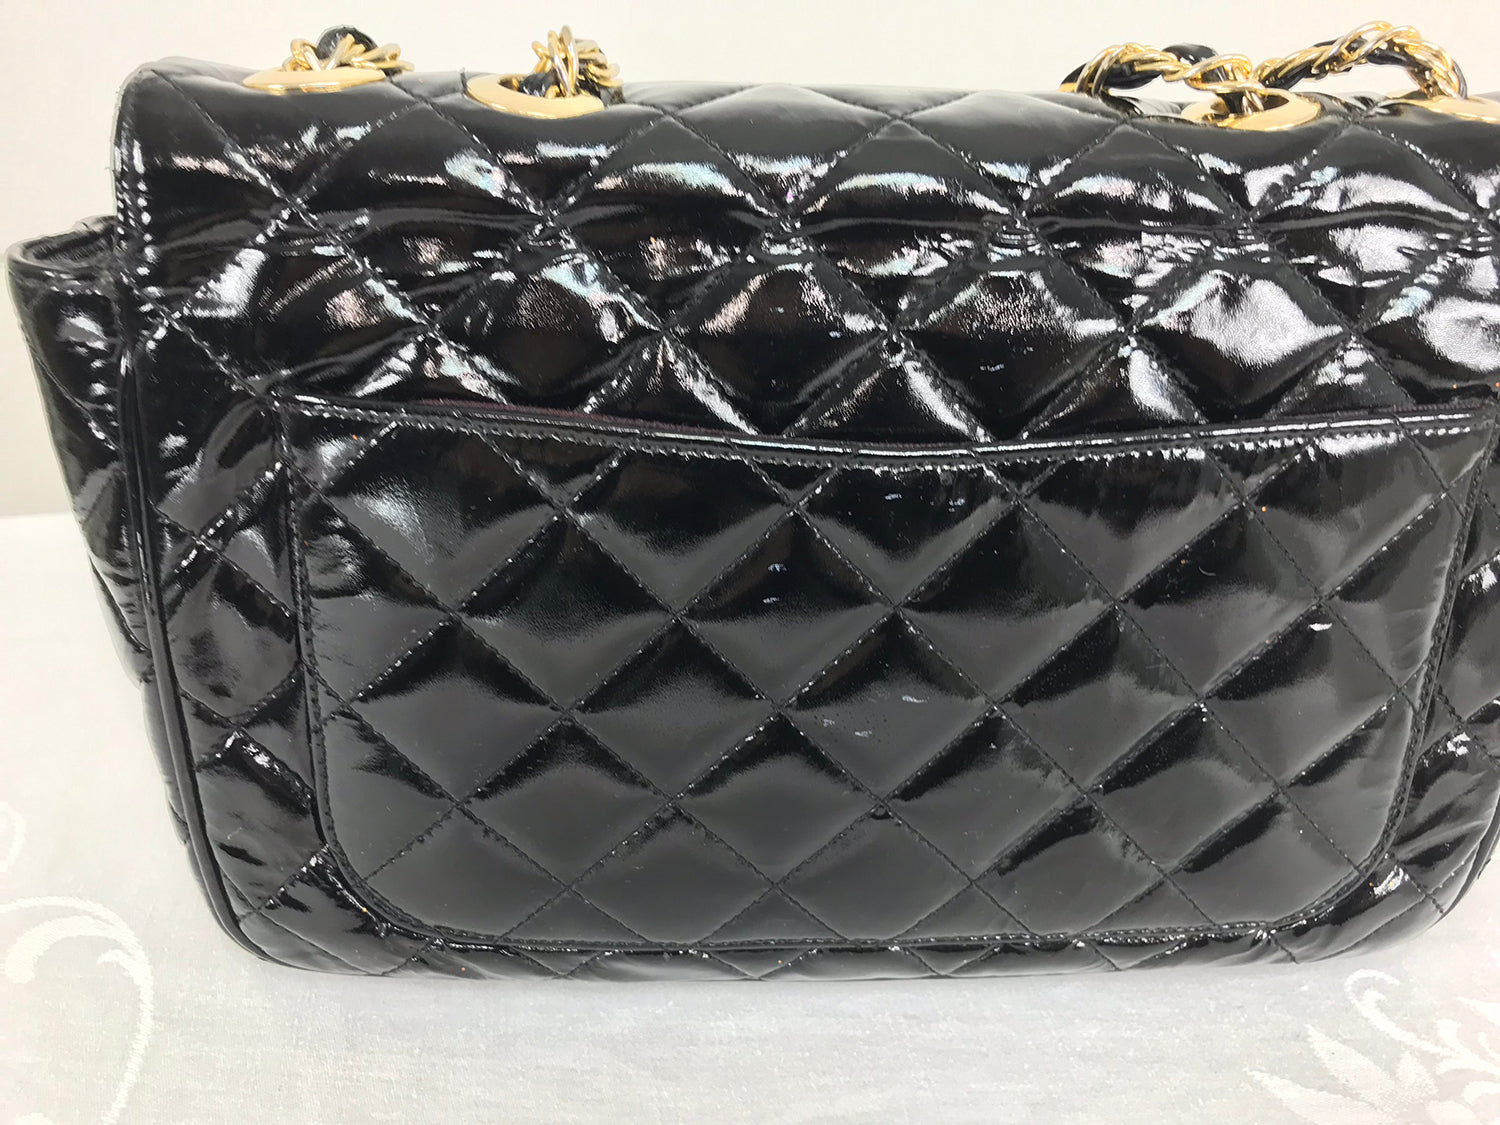 Vintage 1960s Black Purse with Gold Chain